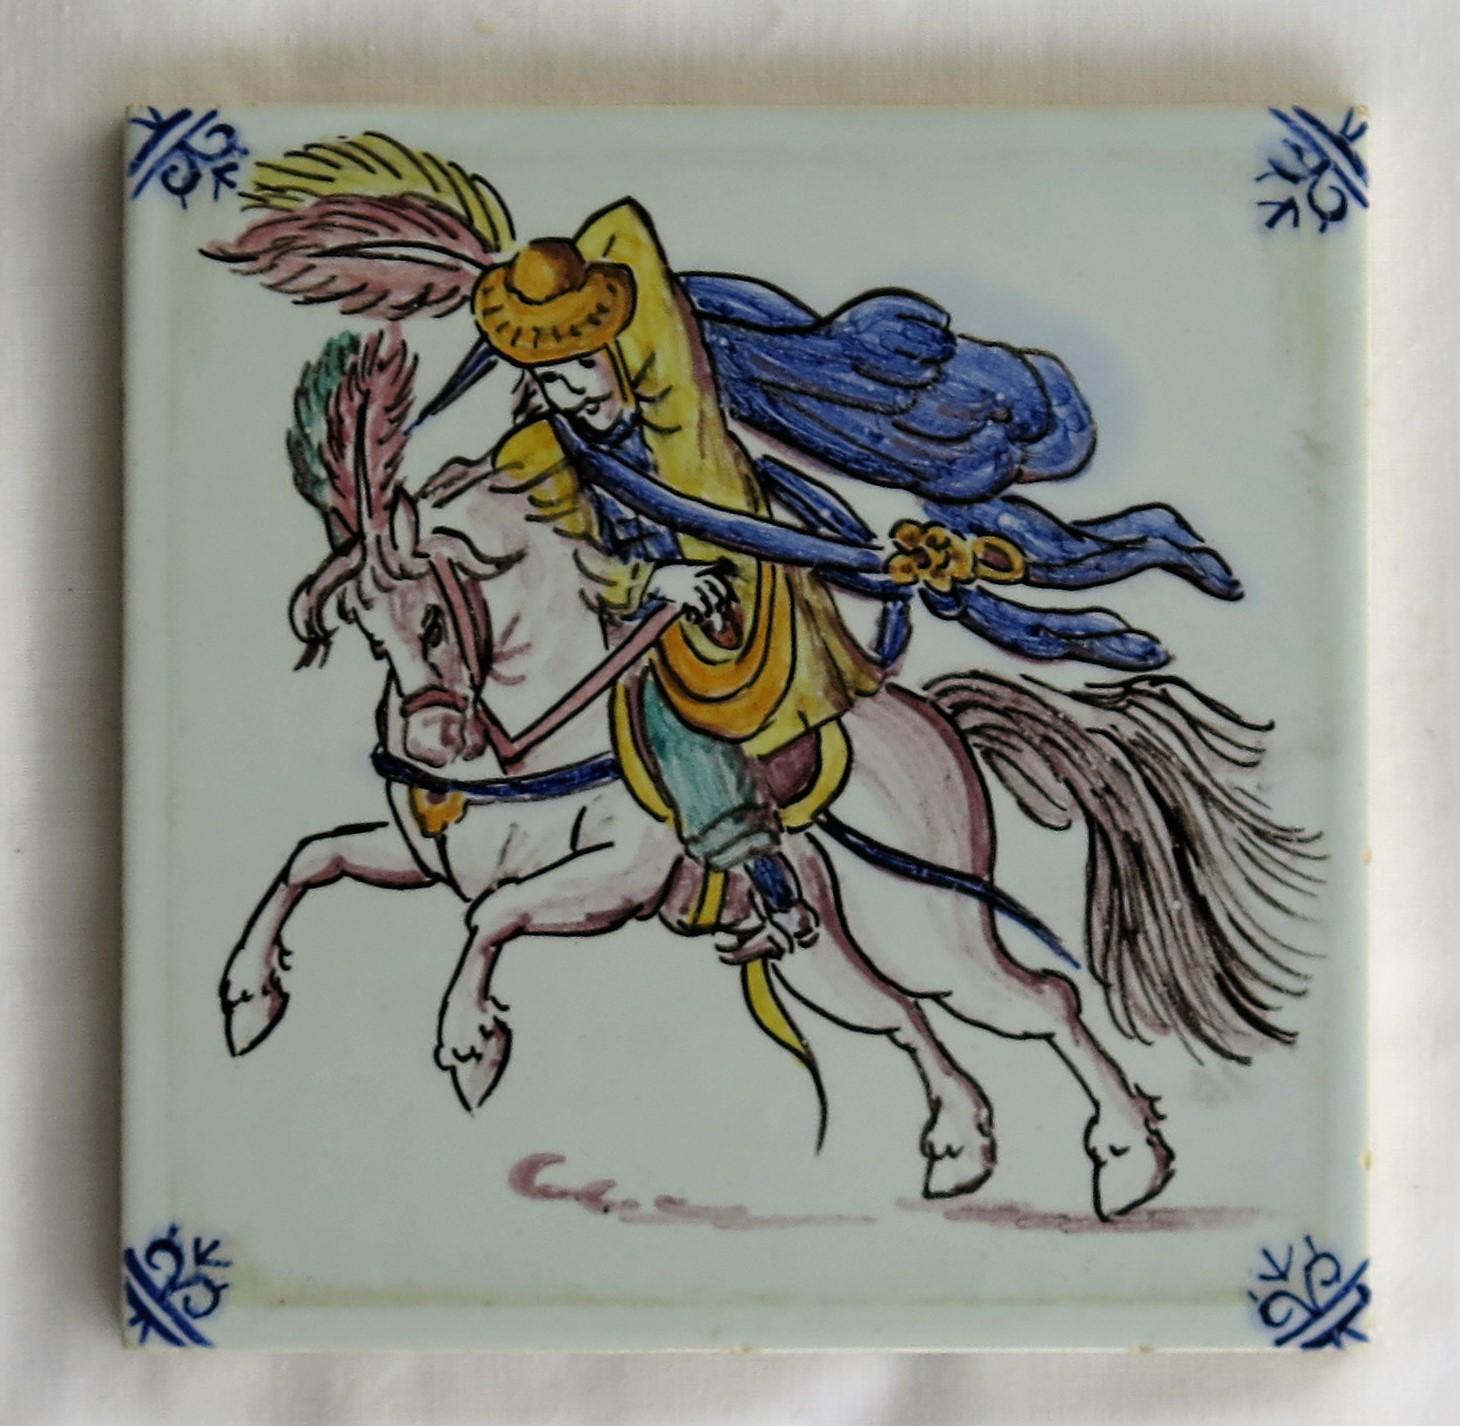 Three Individual Ceramic Delft Wall Tiles Horsemen and Flowers, Mid-20th Century For Sale 5